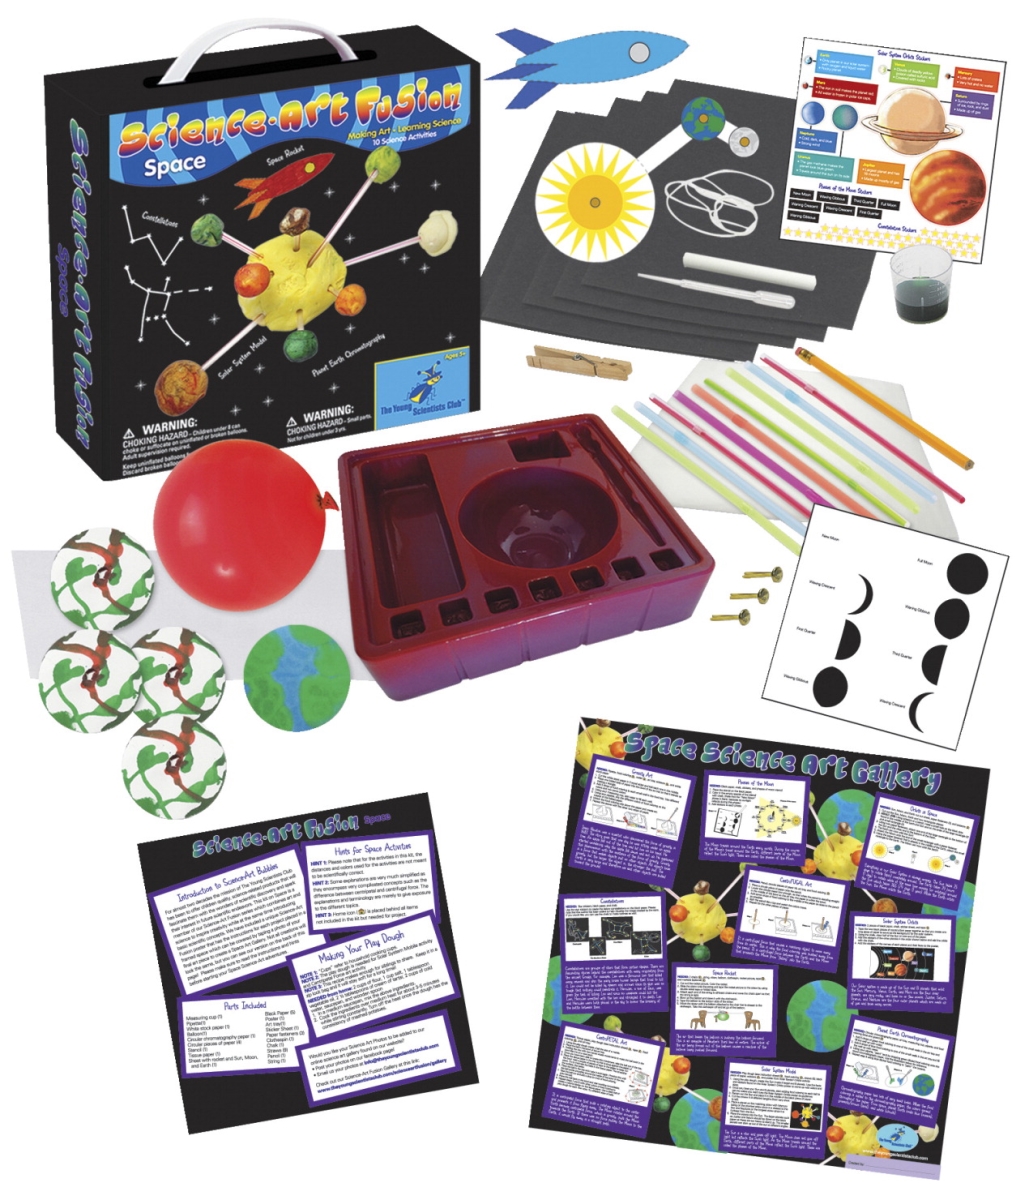 Young Scientists Club 1556795 Science-art Fusion Space Kit